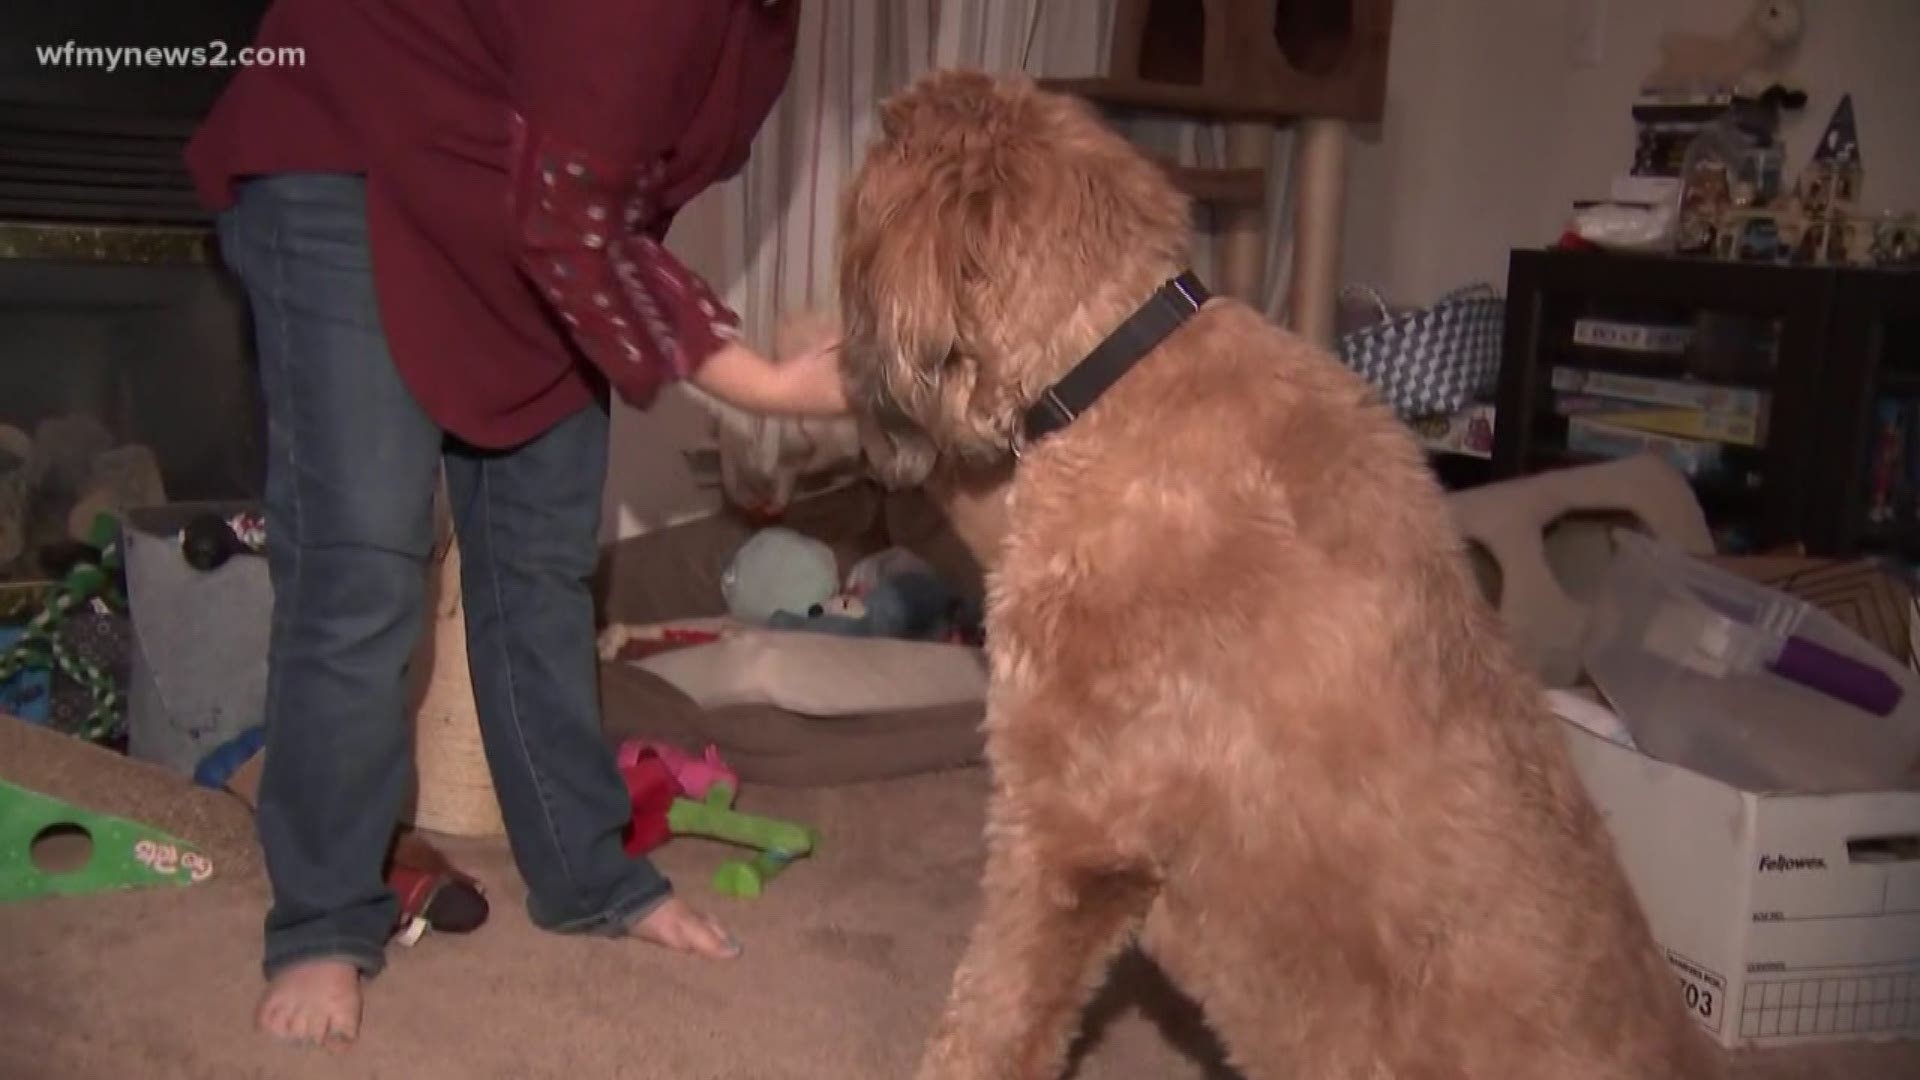 Nearly 50 complaints came in after a company that sold service dogs didn’t deliver on exactly what was promised.